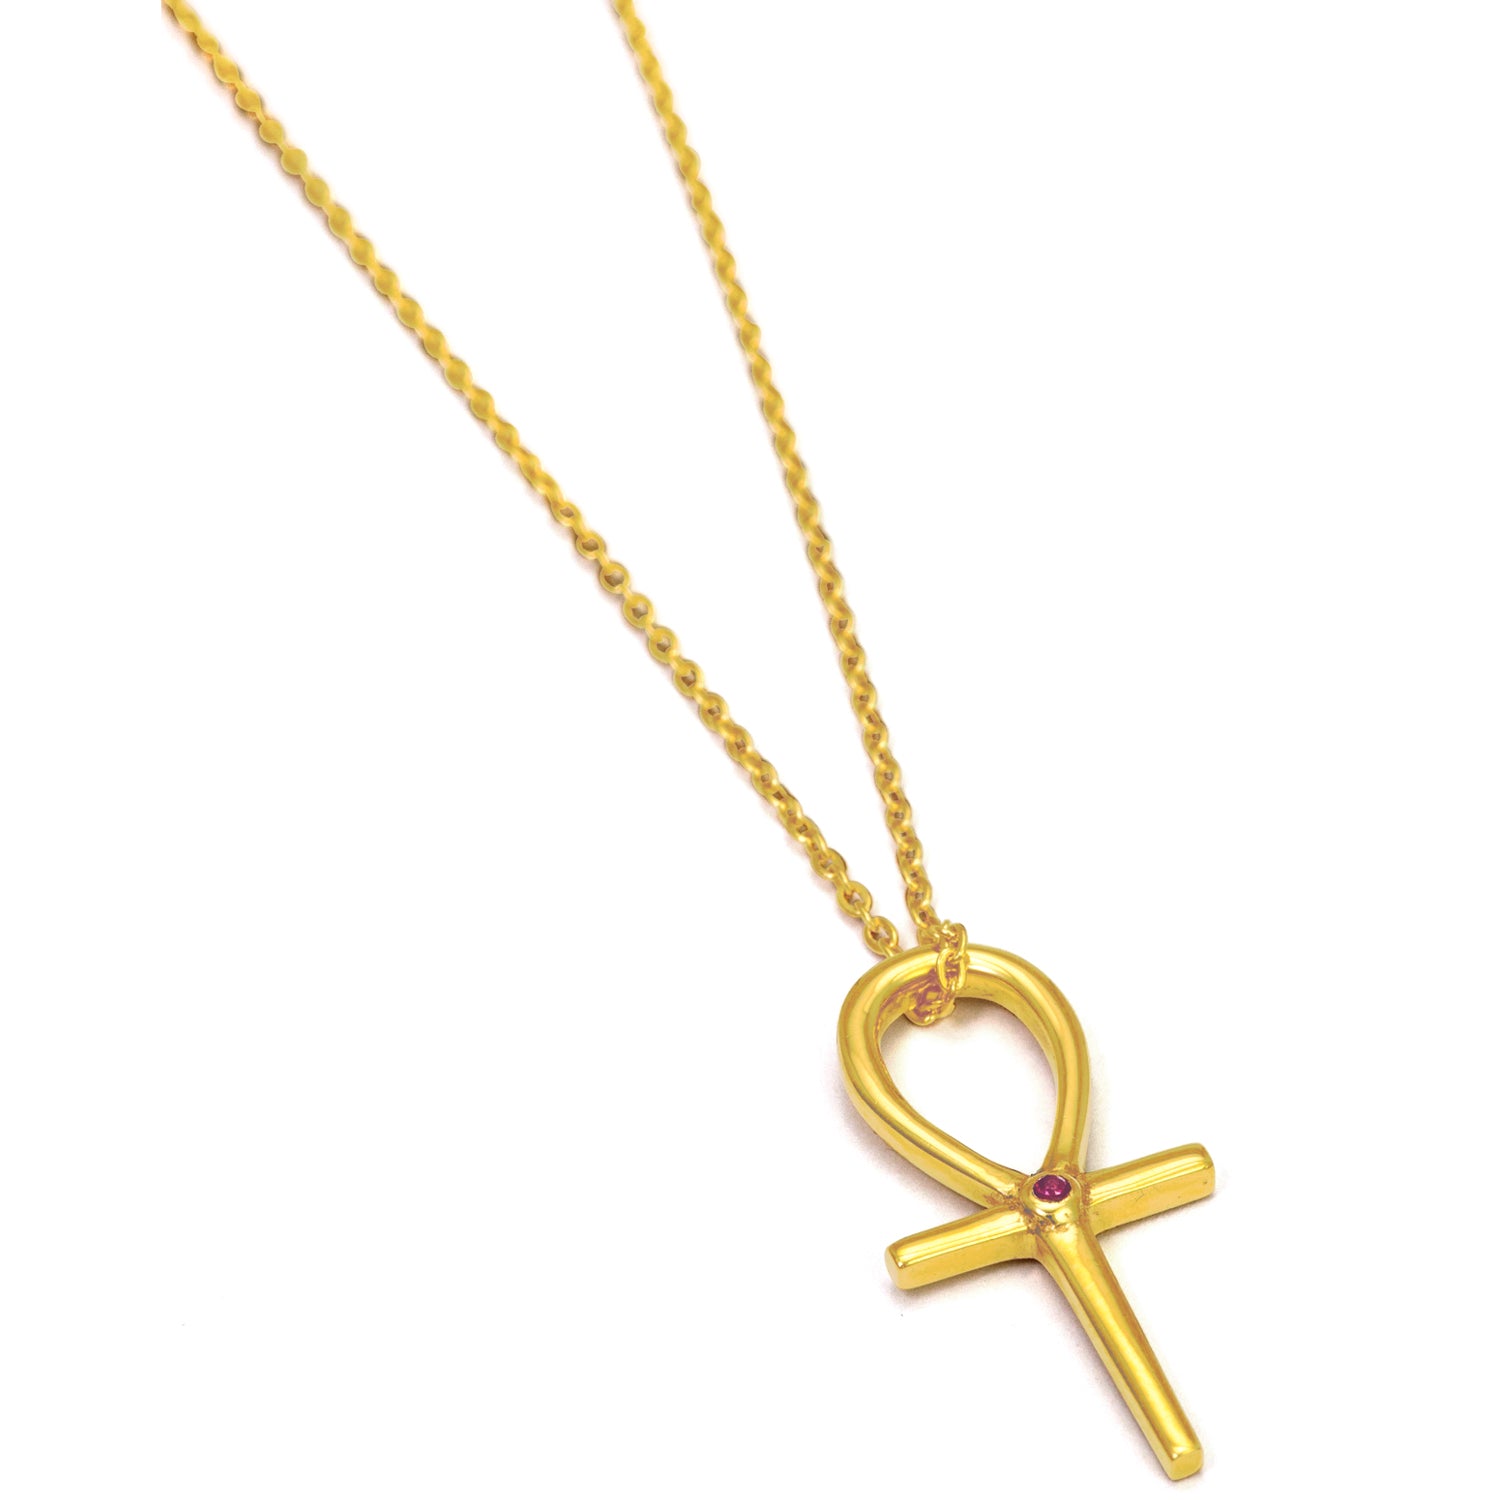 Ankh pendant made from gold-plated Sterling silver with ruby - key of life